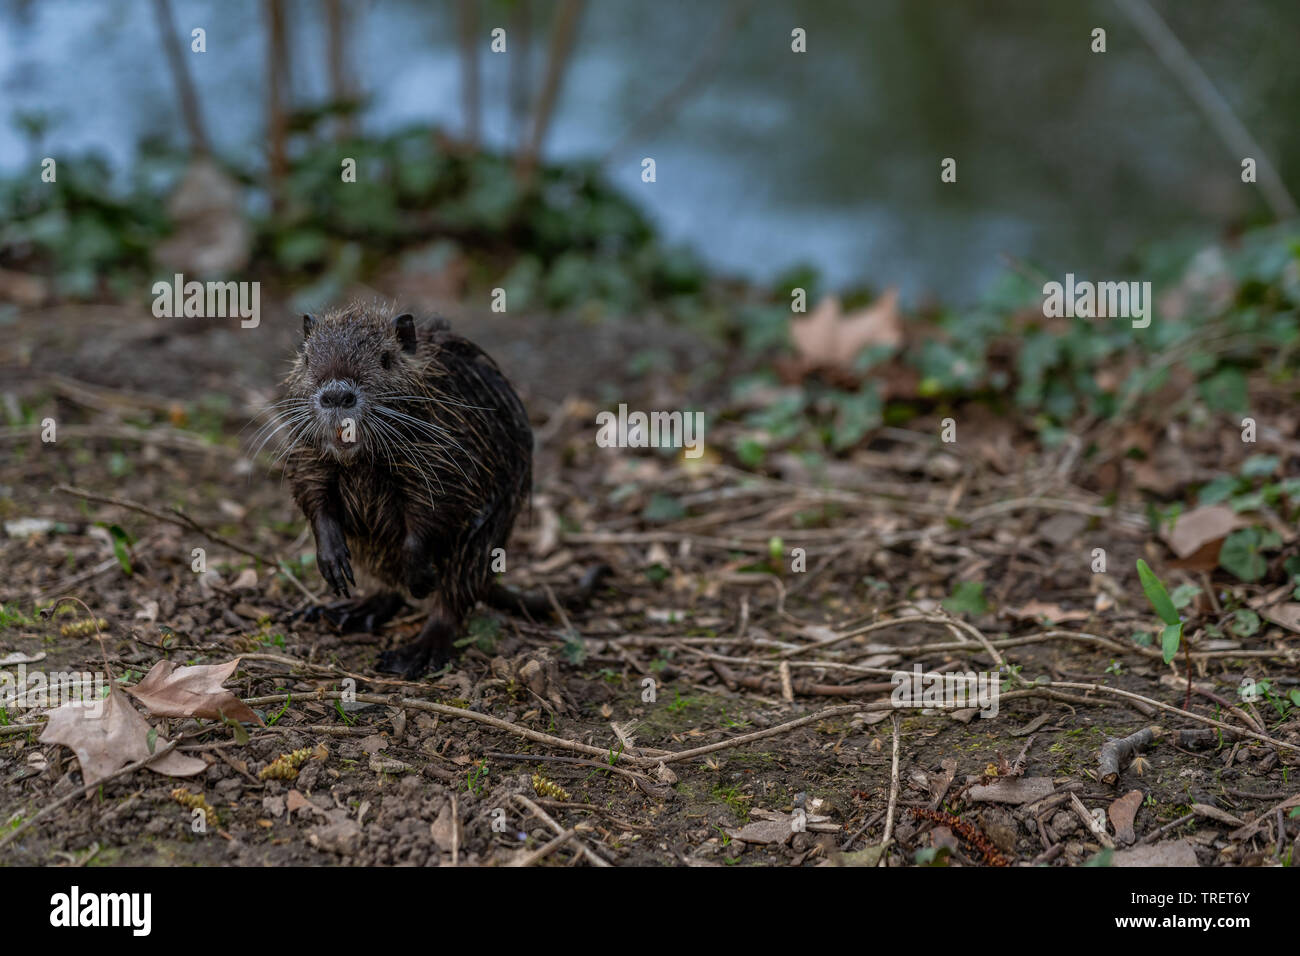 young Coypu or Nutria rodent in the wild, frankfurt, germany Stock Photo